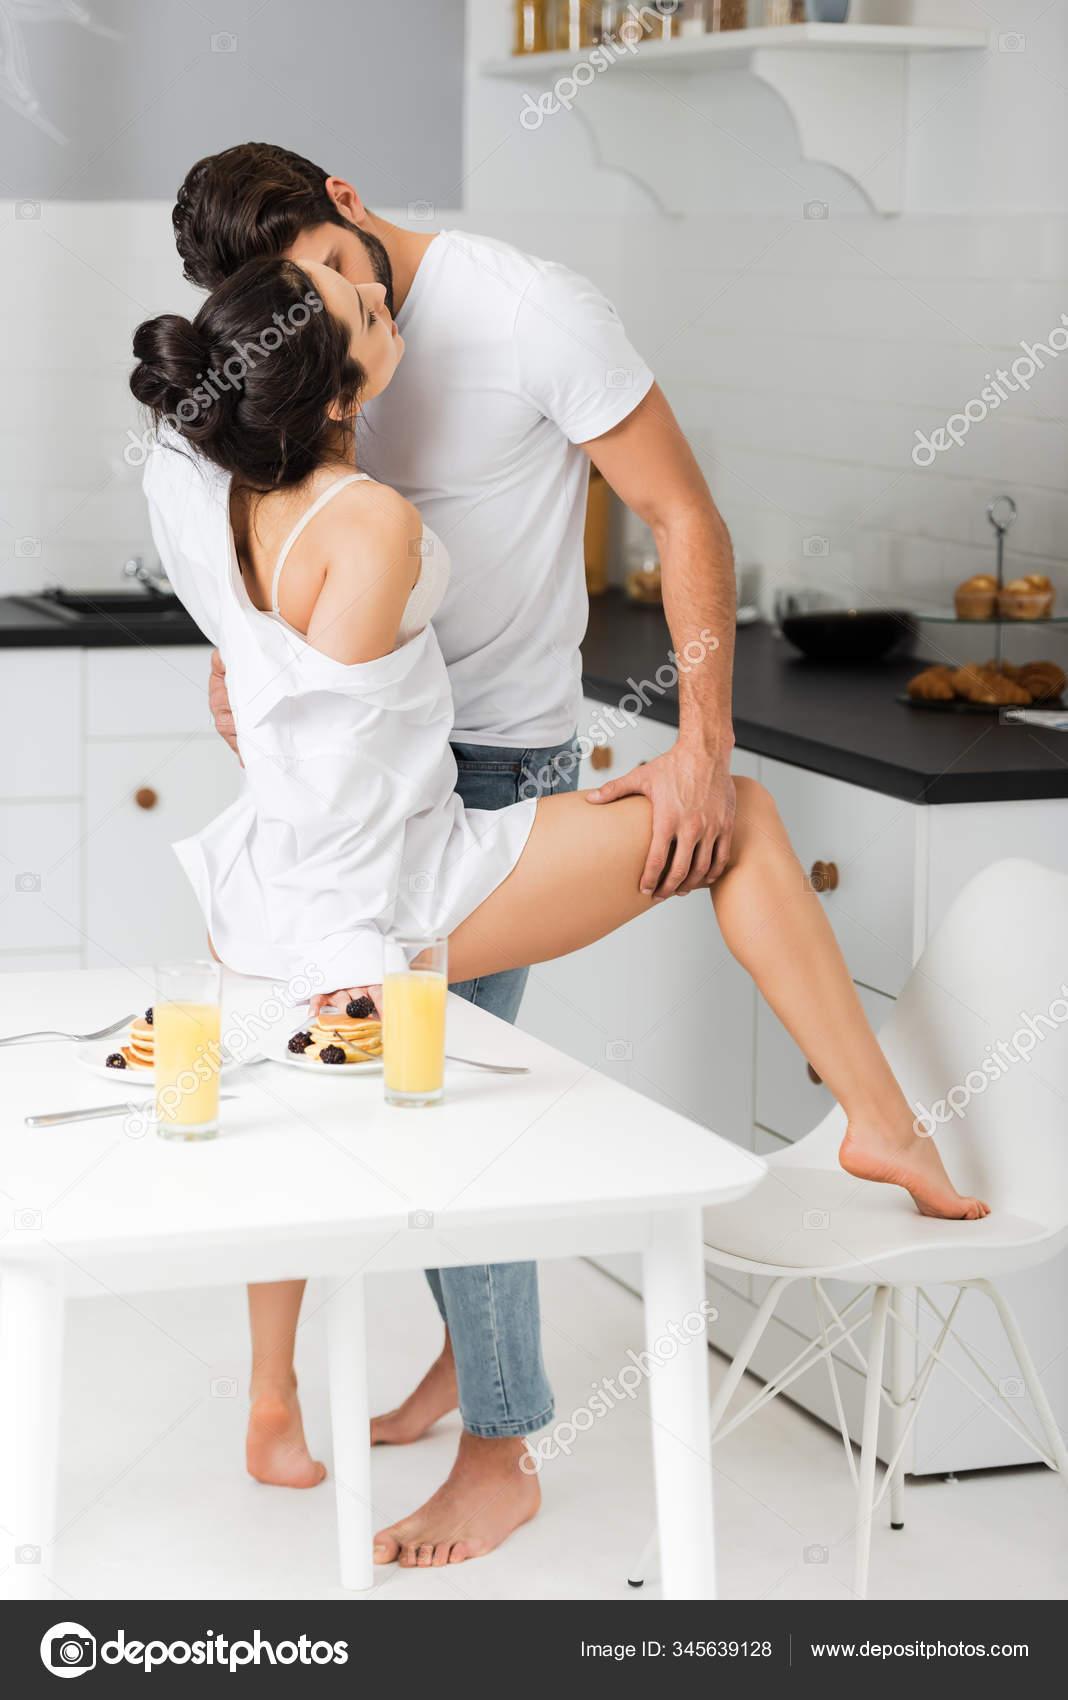 Sexy legs cooking in the kitchen